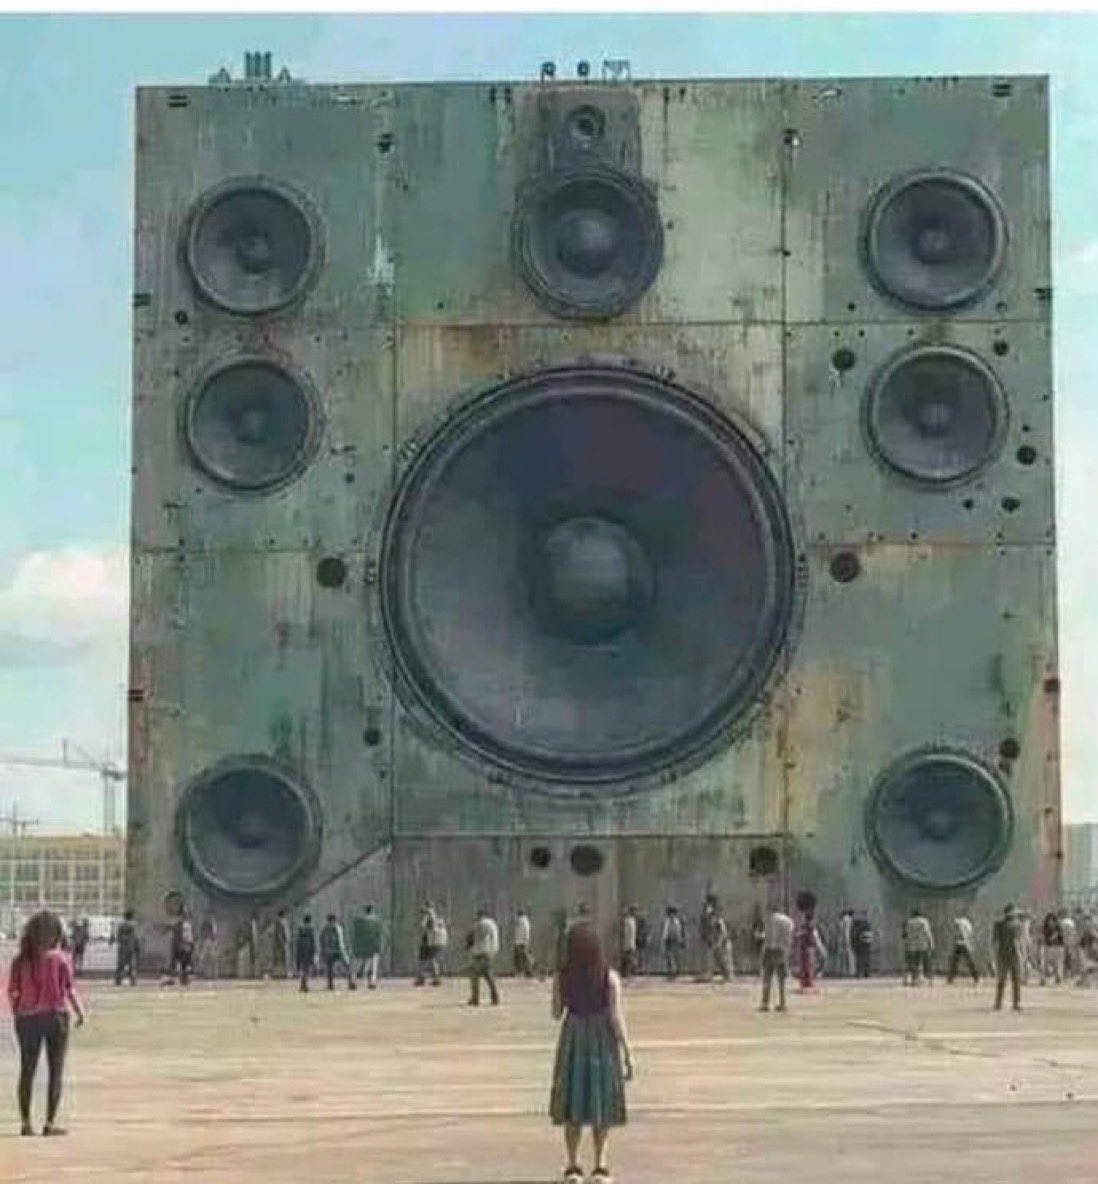 What song are you playing here? 🤔